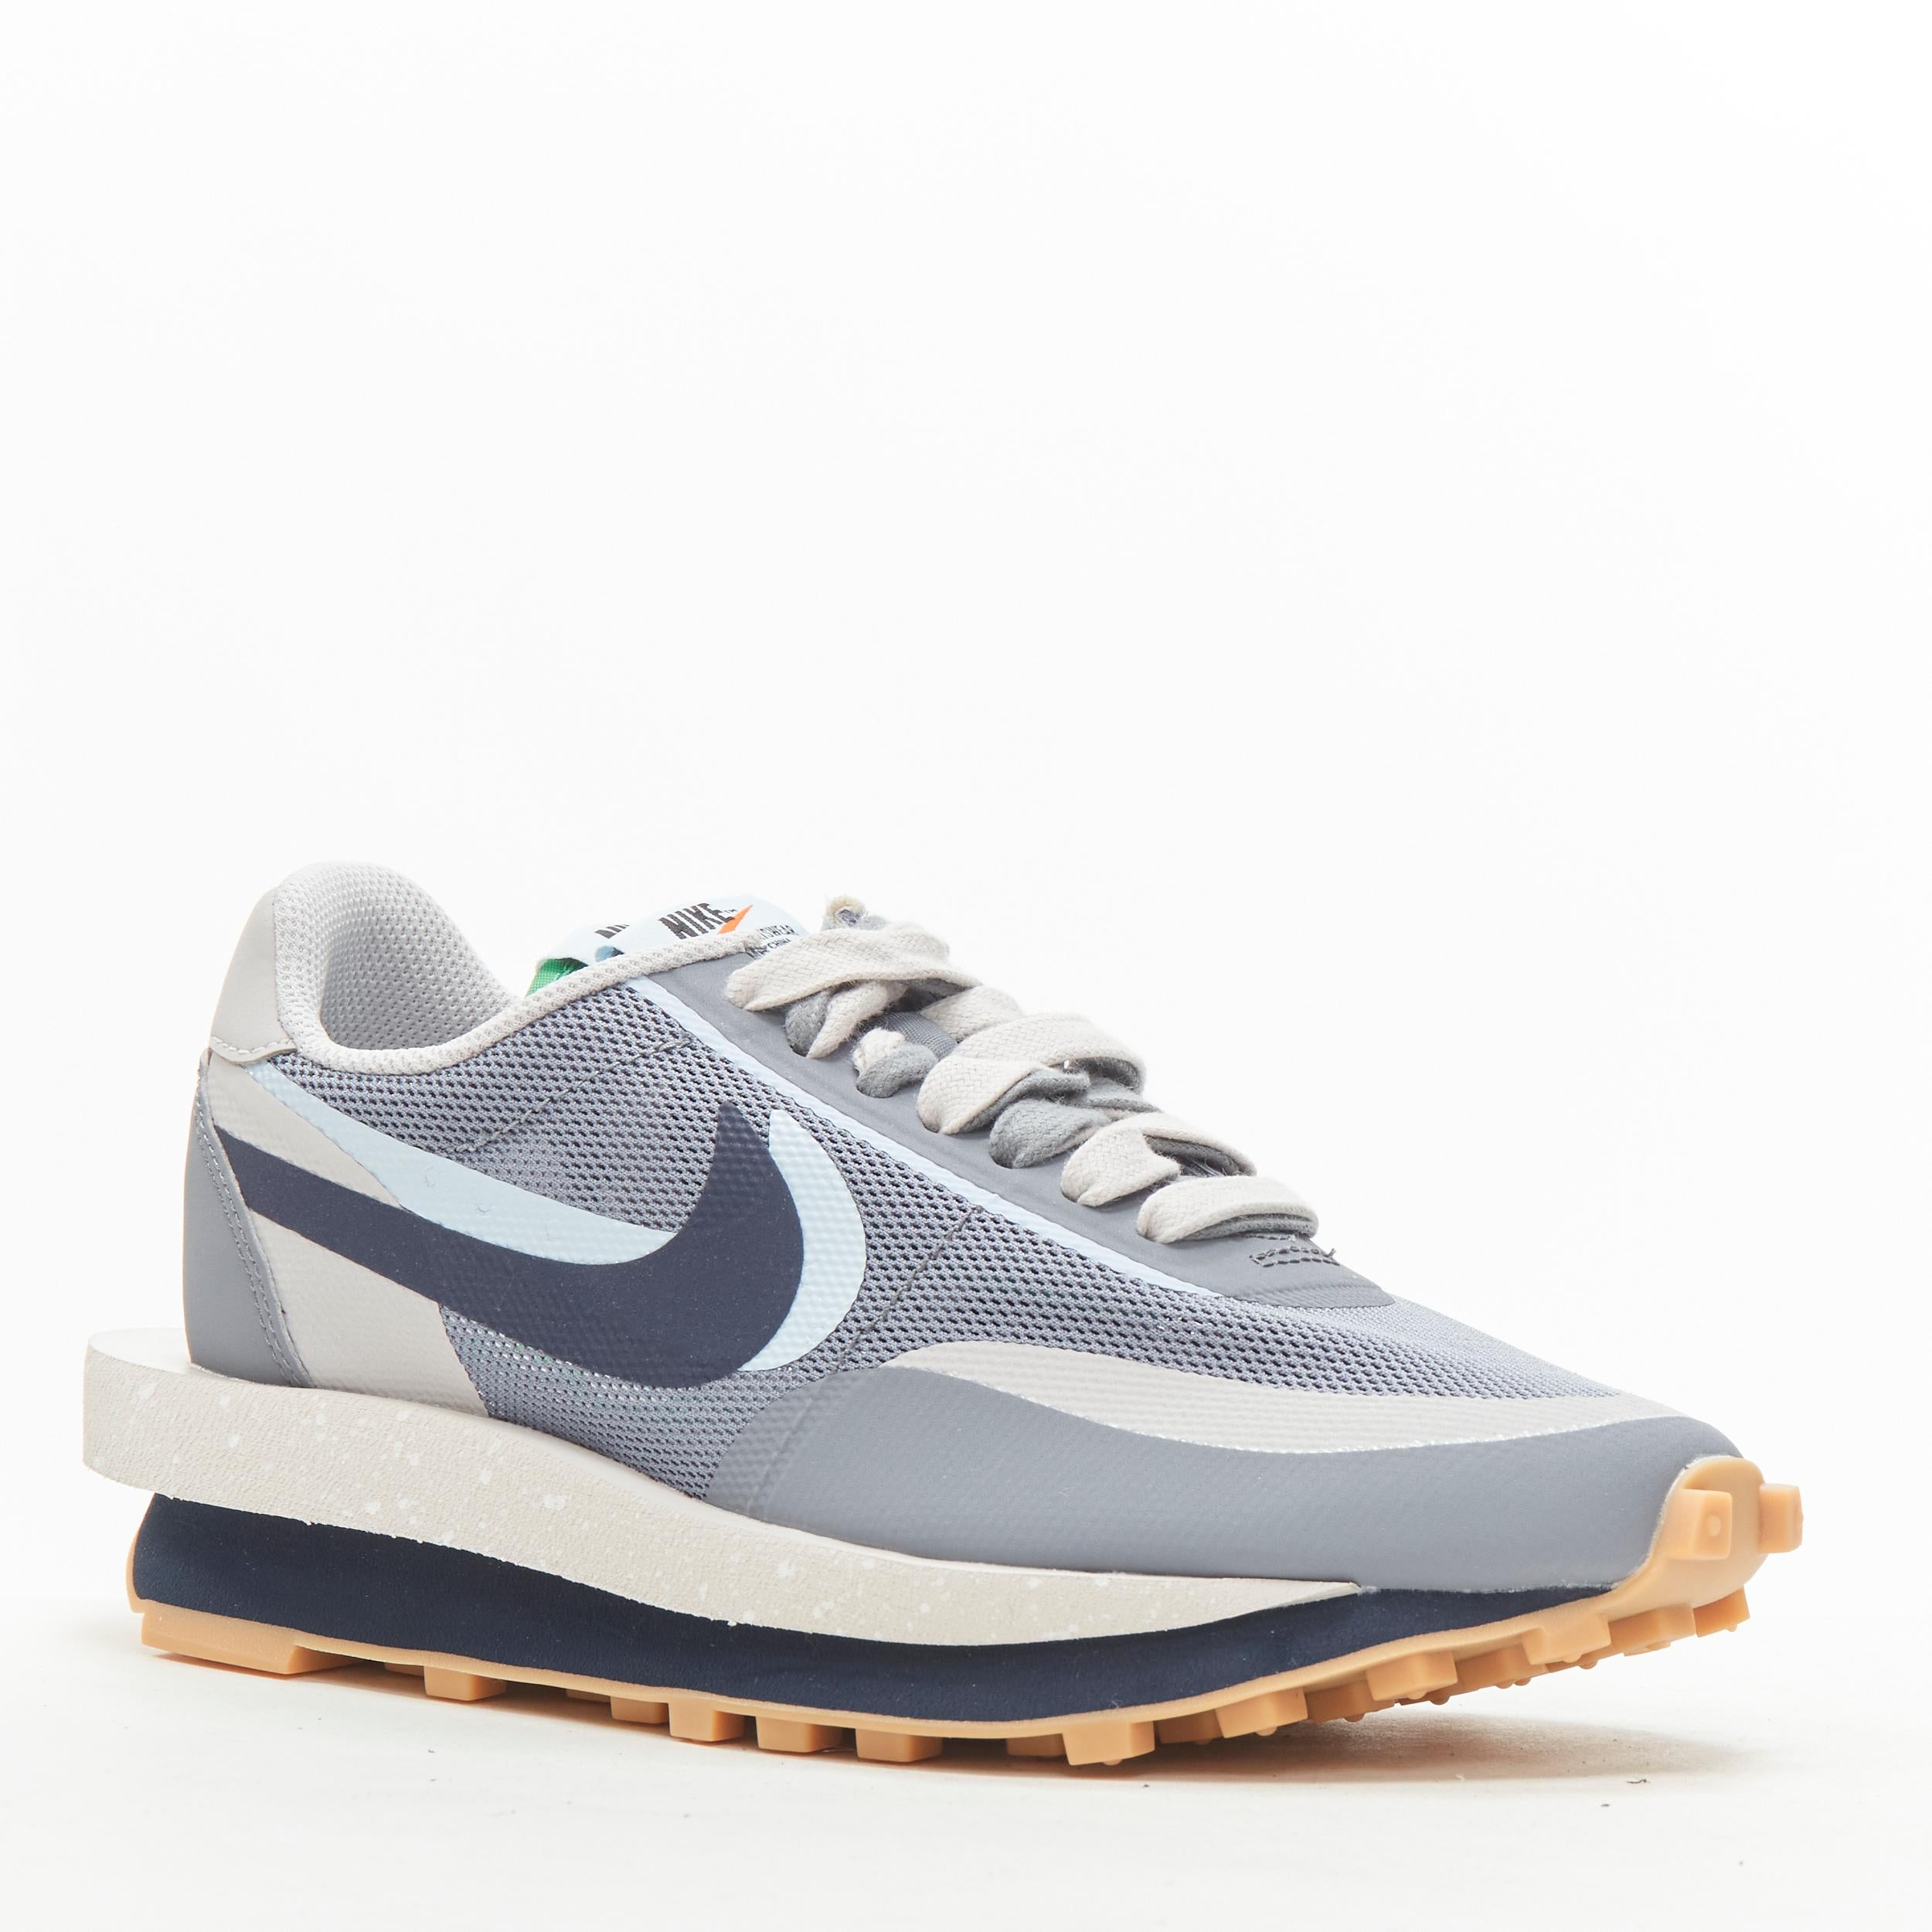 NIKE SACAI CLOT LD Waffle DH3114 001 grey navy sneaker US5 EU37.5 
Reference: ANWU/A00349 
Brand: Nike 
Designer: Sacai 
Model: DH3114 001 
Collection: Clot Collaboration 
Material: Fabric 
Color: Grey 
Pattern: Solid 
Closure: Lace 
Extra Detail: